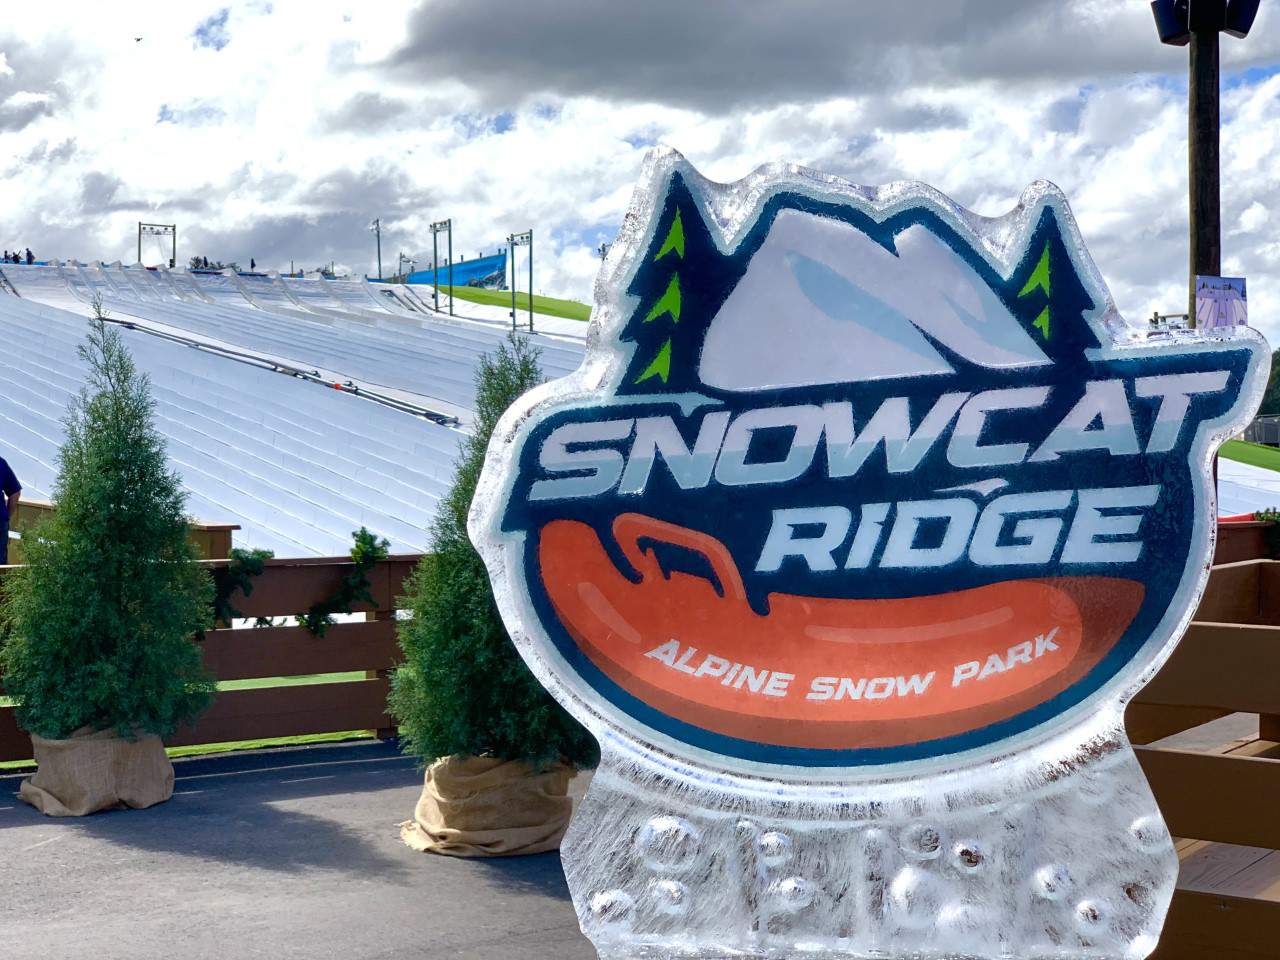 Officials shut down Florida’s first snow park for health and safety violations